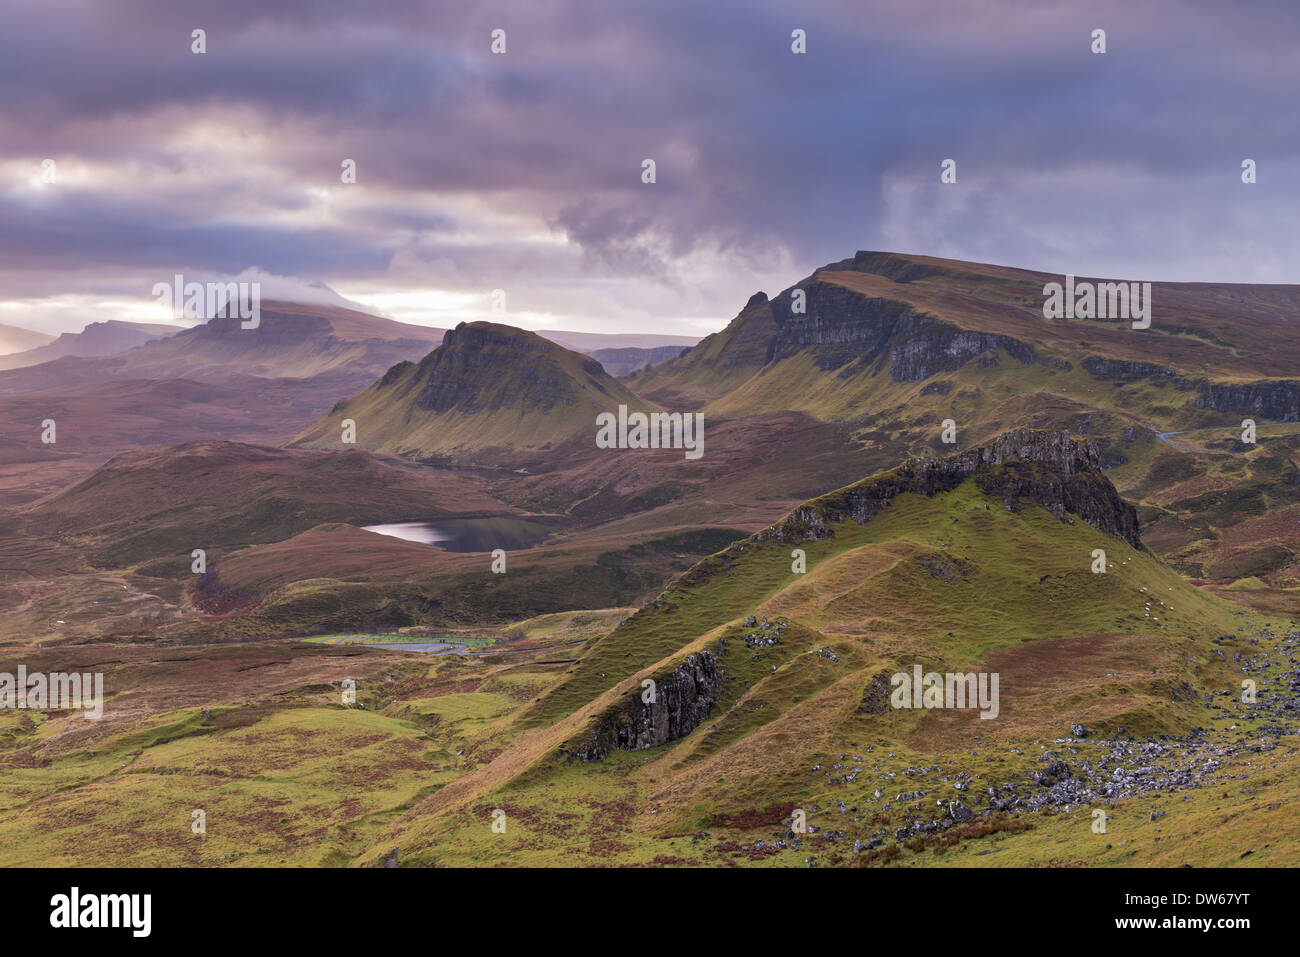 Dawn over the Trotternish mountain range, viewed from the Quiraing, Isle of Skye, Scotland. Winter (December) 2013. Stock Photo